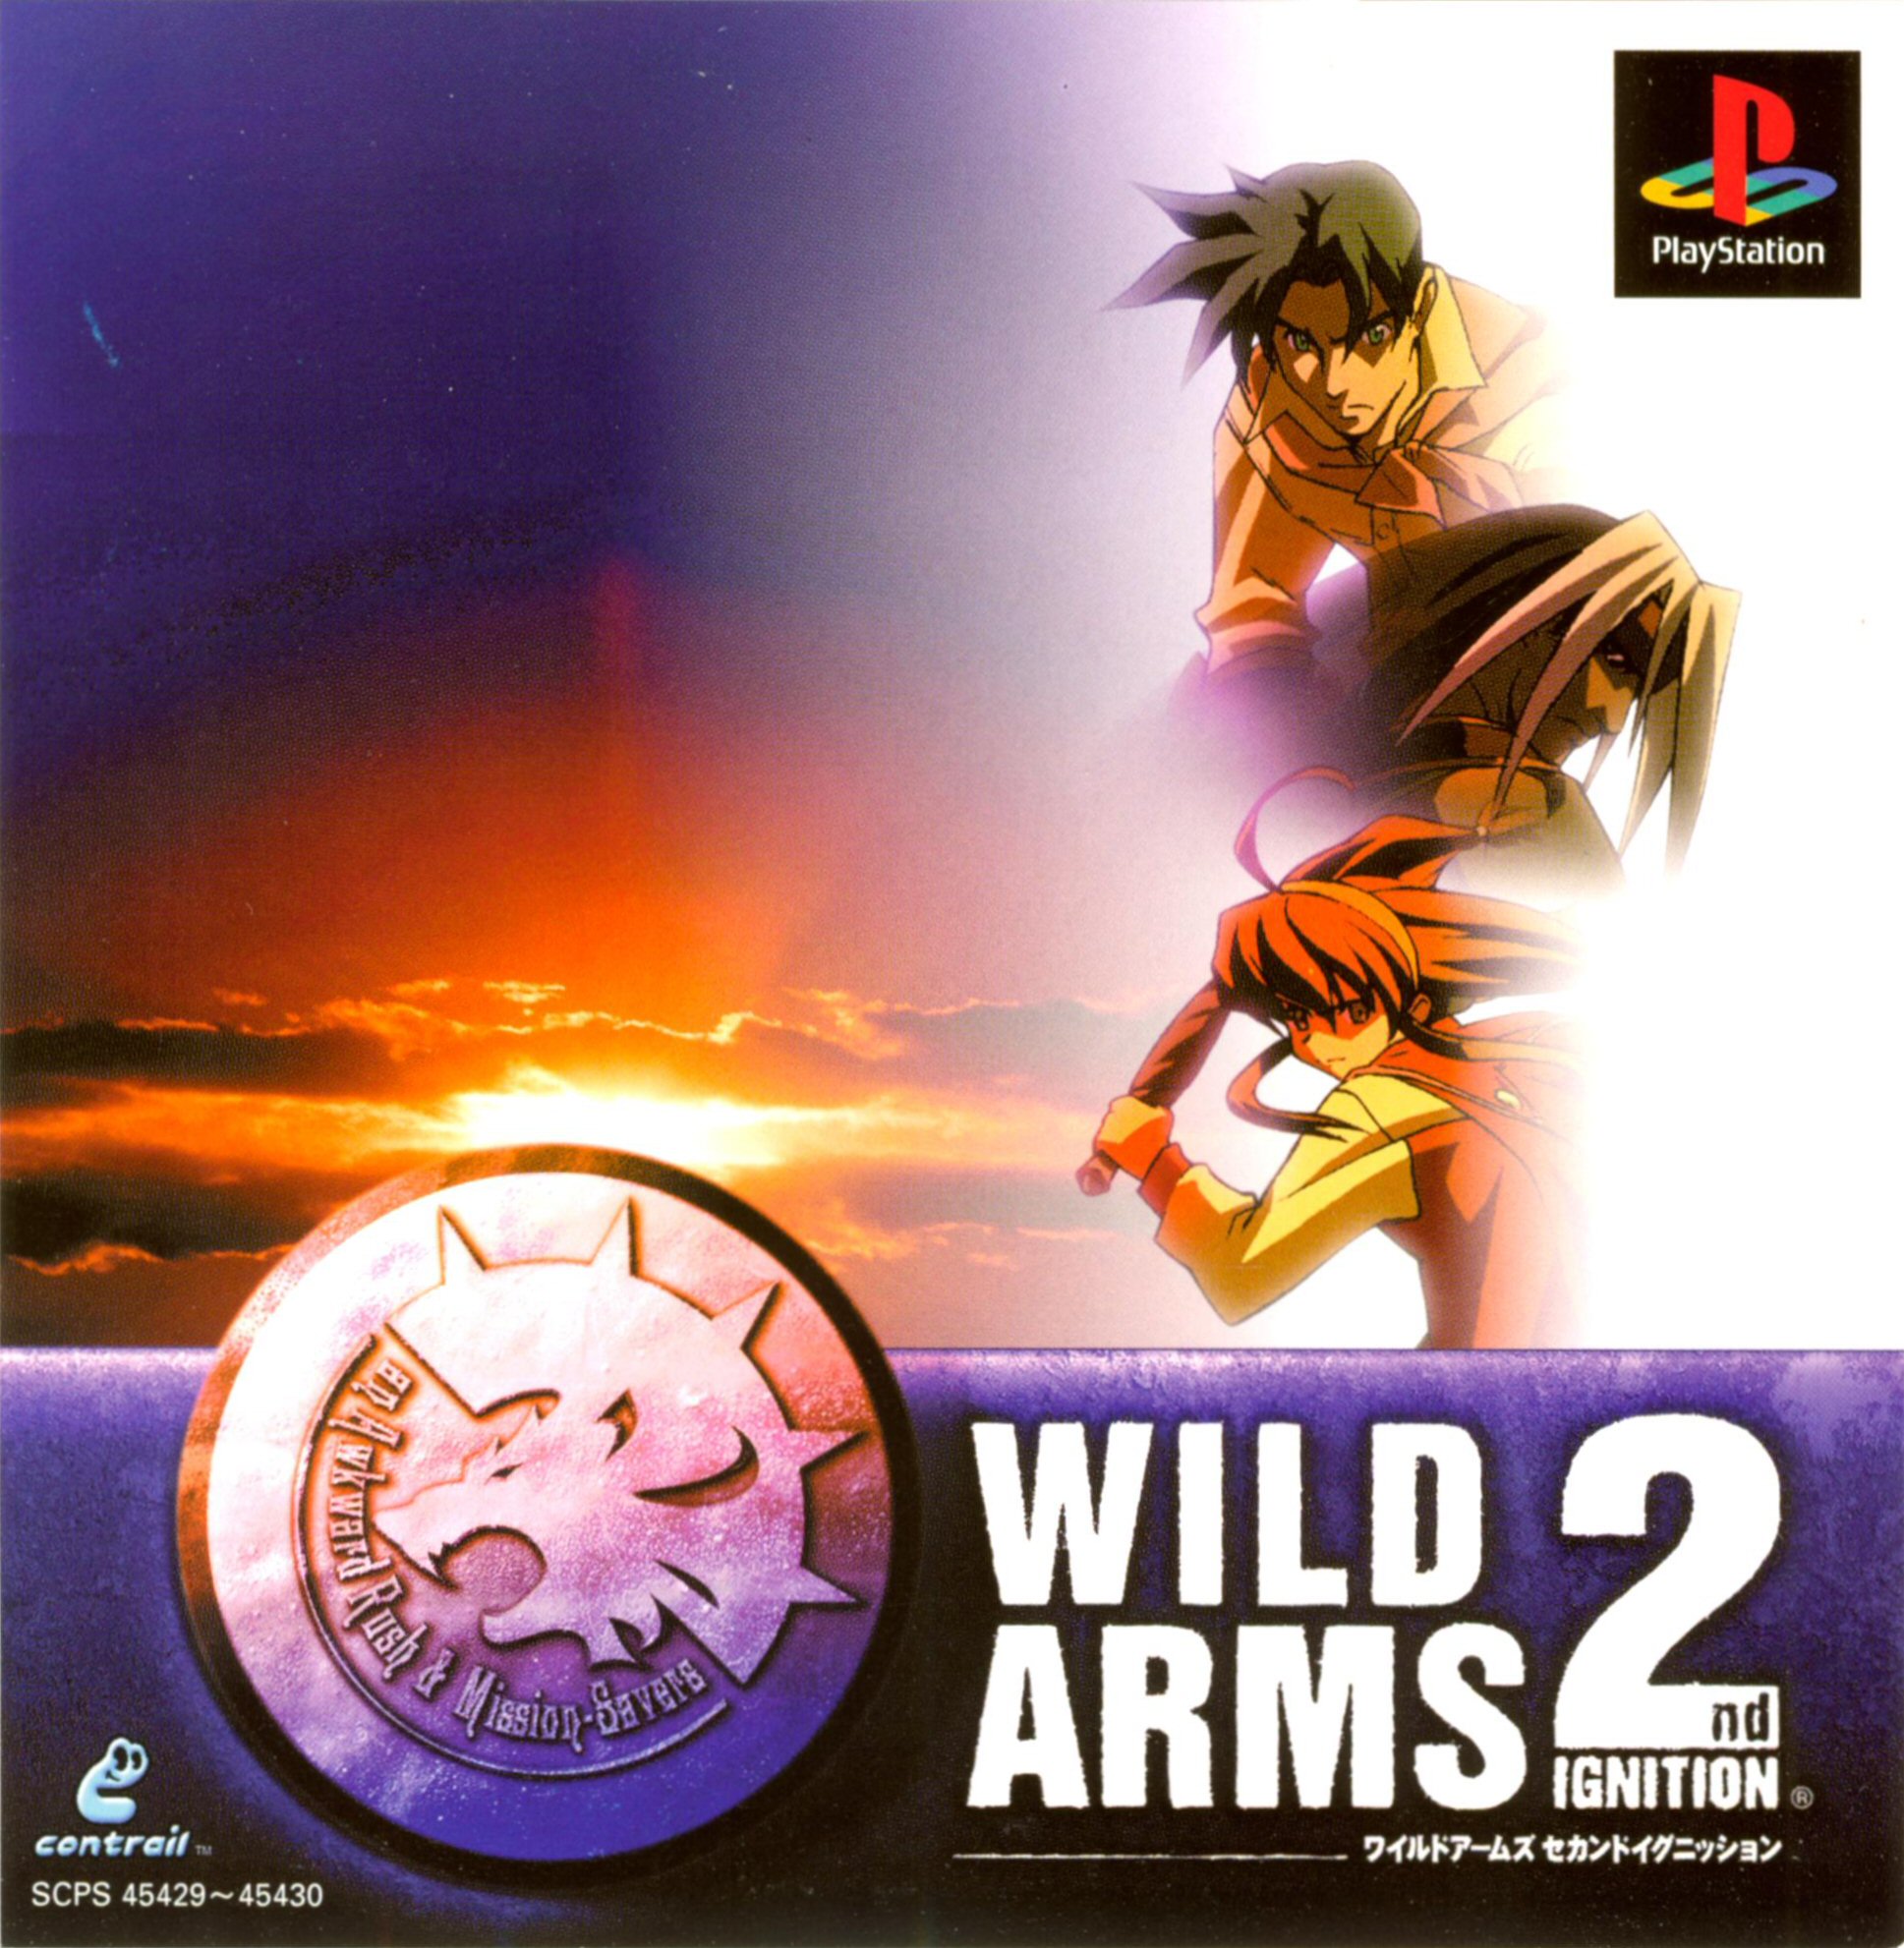 Wild Arms 2nd Ignition PSX cover